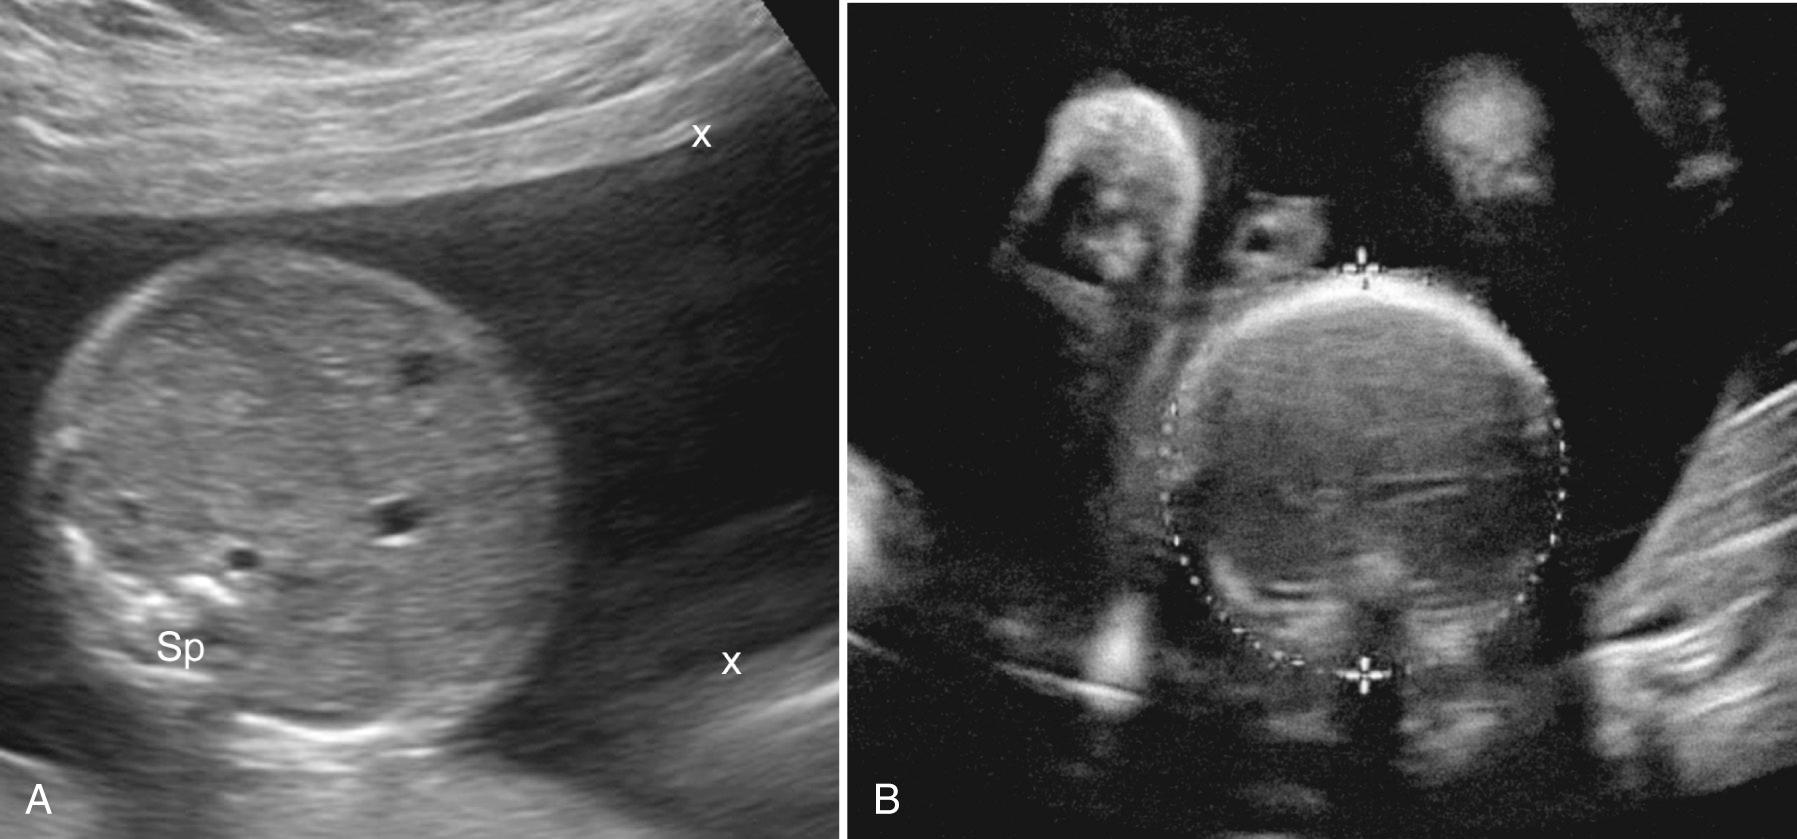 FIG. 38.1, Esophageal Atresia and Absent Stomach.